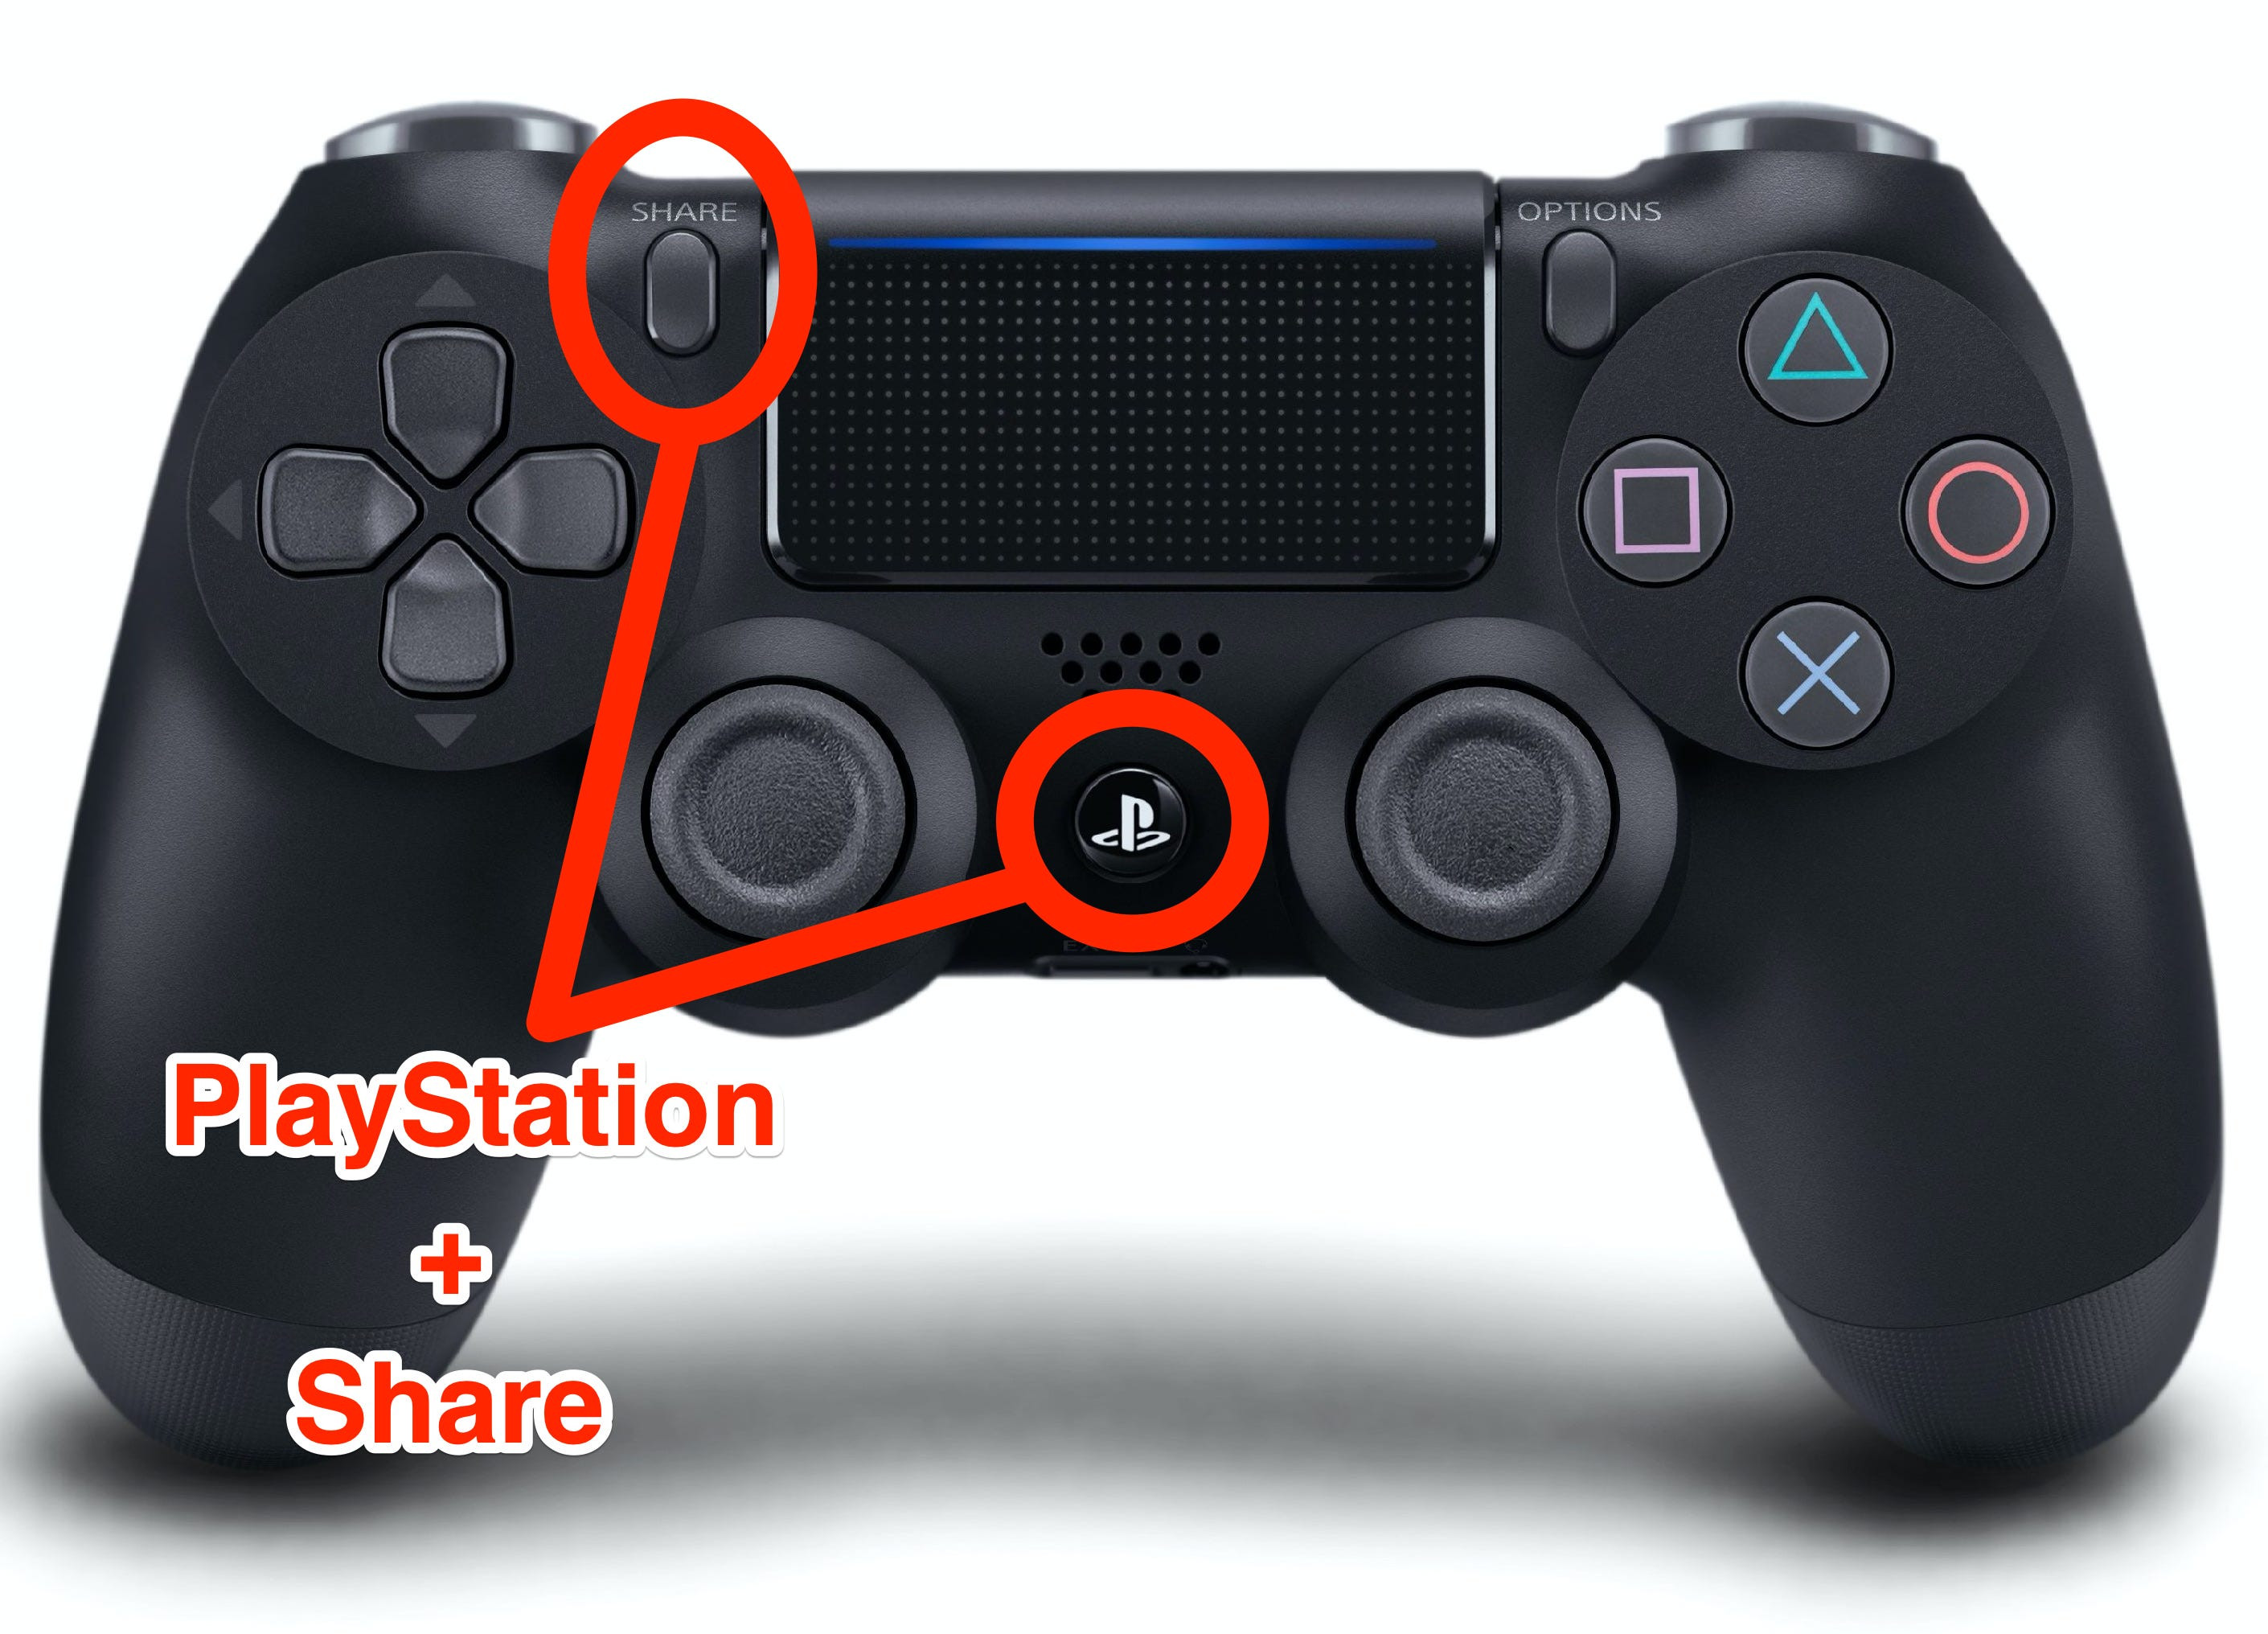 How to connect and pair a PS4 controller to your PC using Bluetooth or